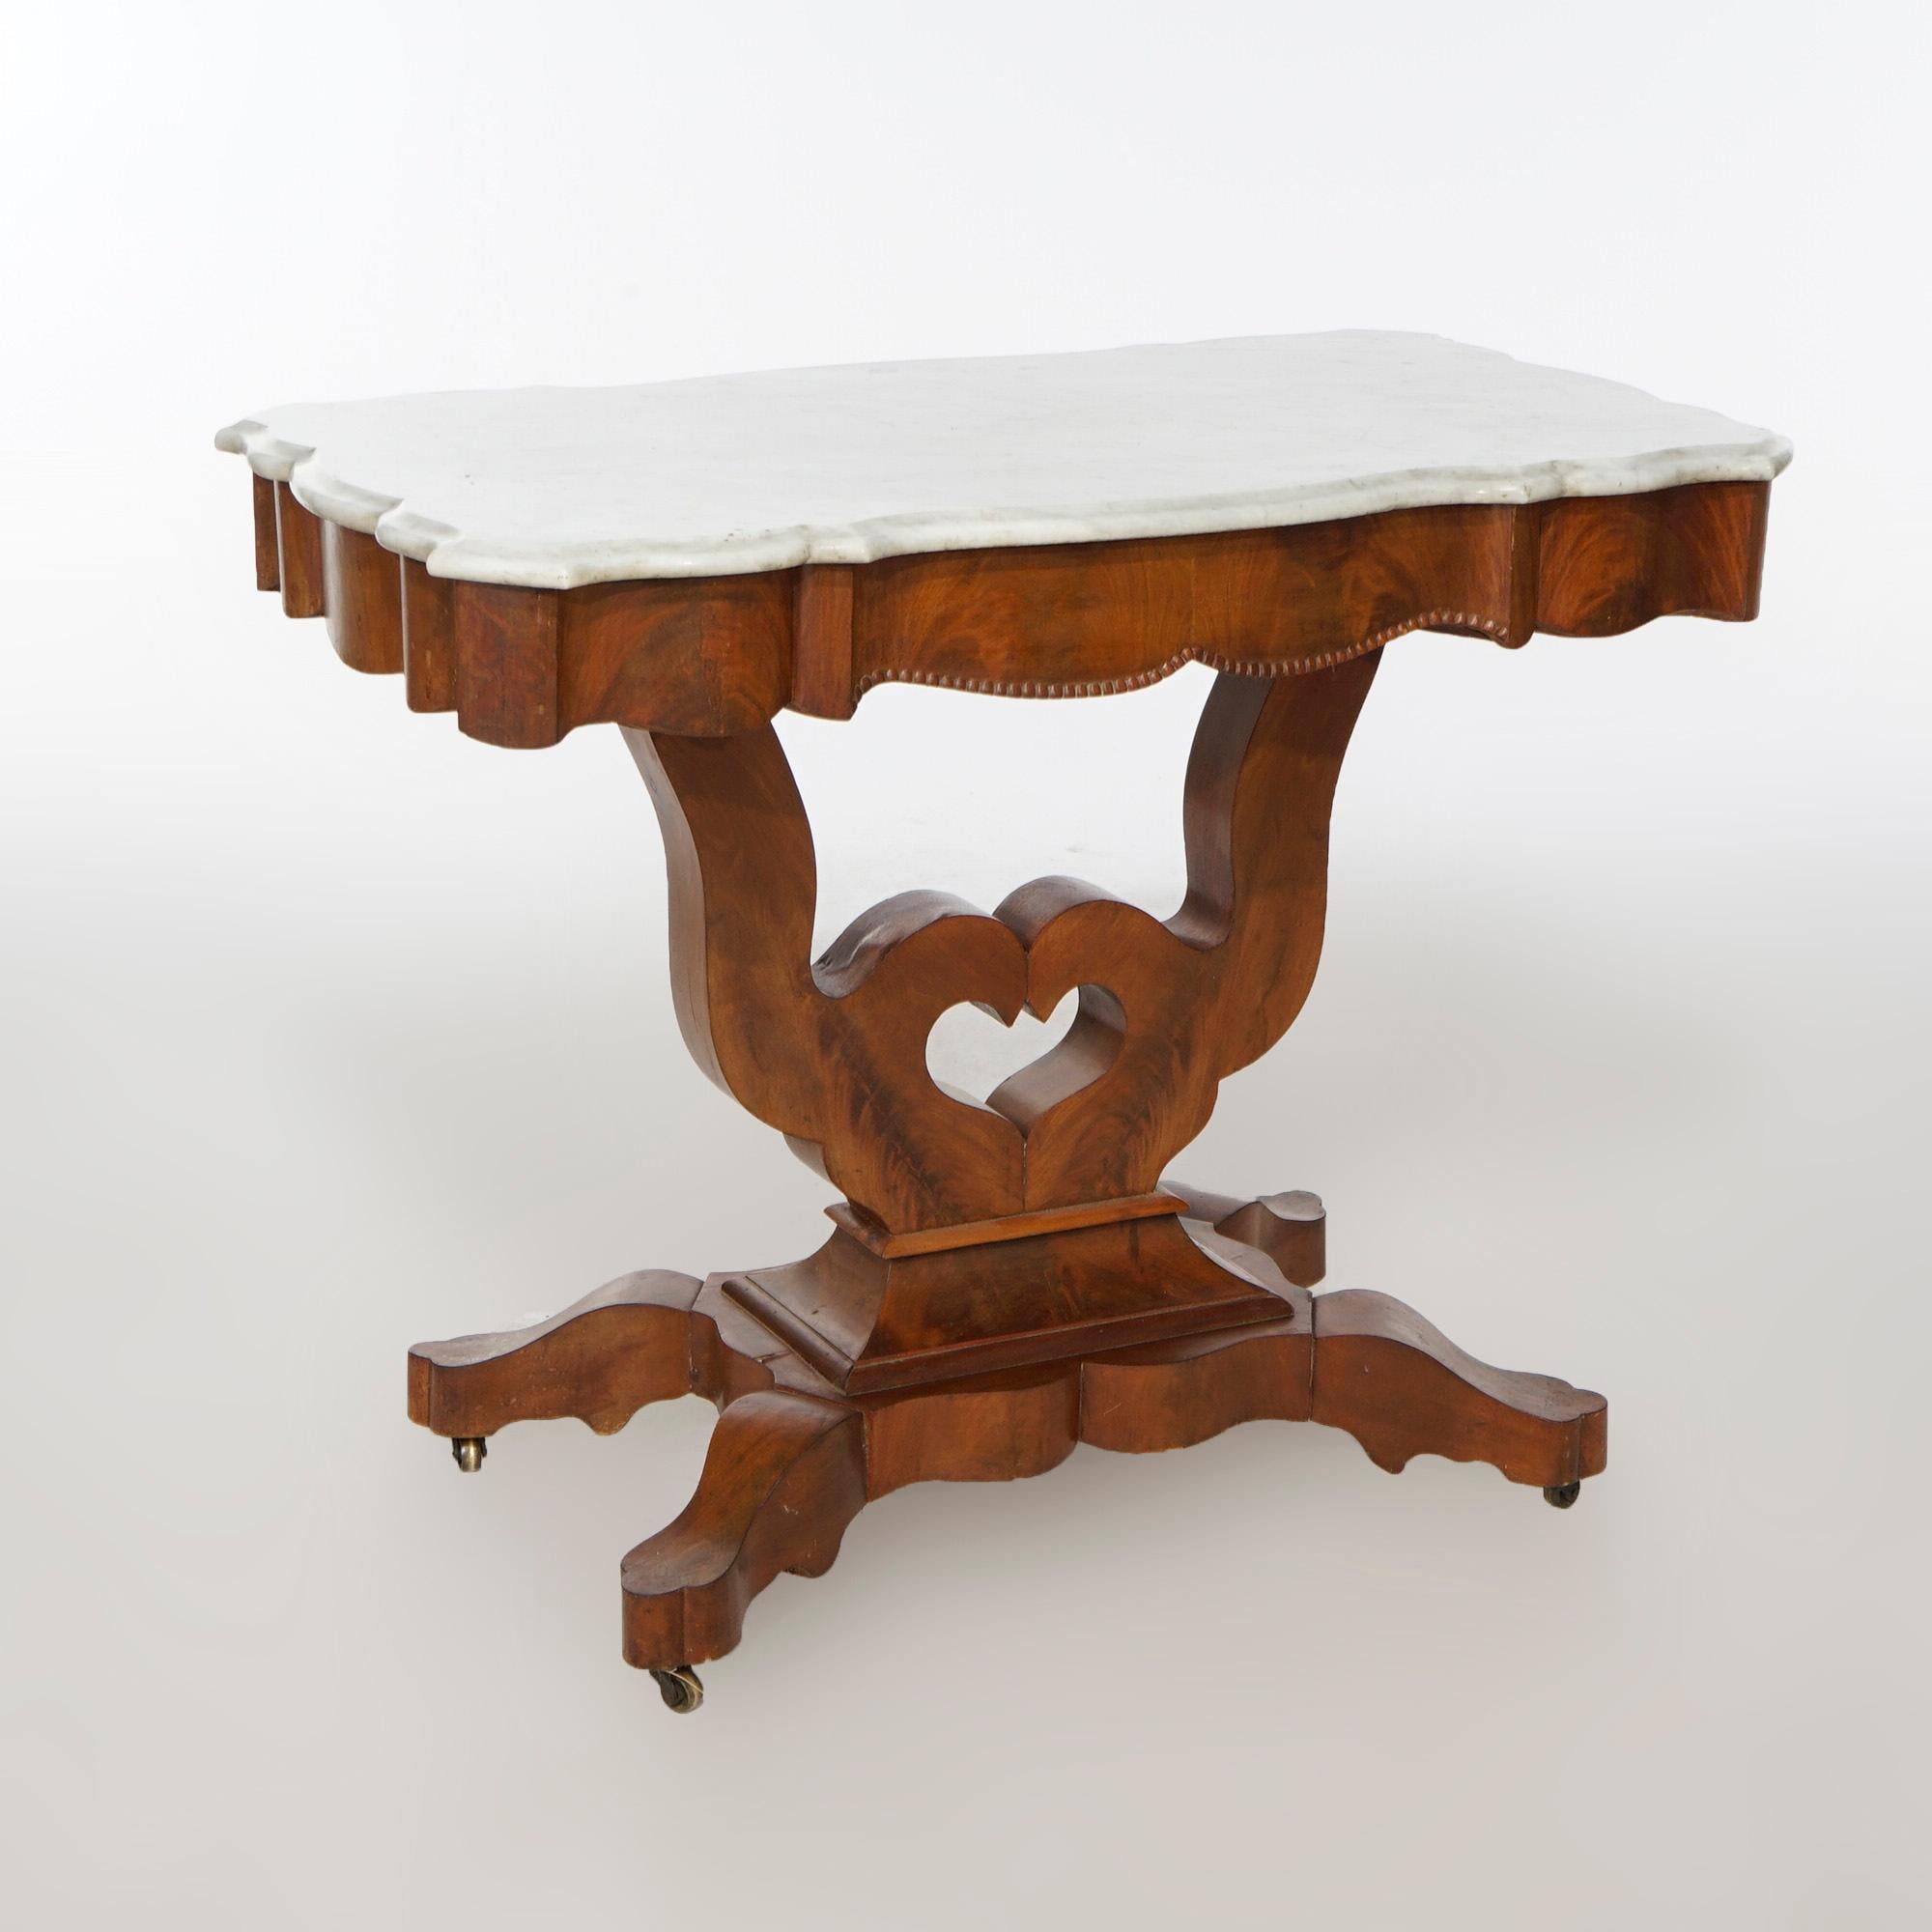 19th Century Antique Neoclassical Flame Mahogany & Marble Lyre Turtle Top Parlor Table c1880 For Sale